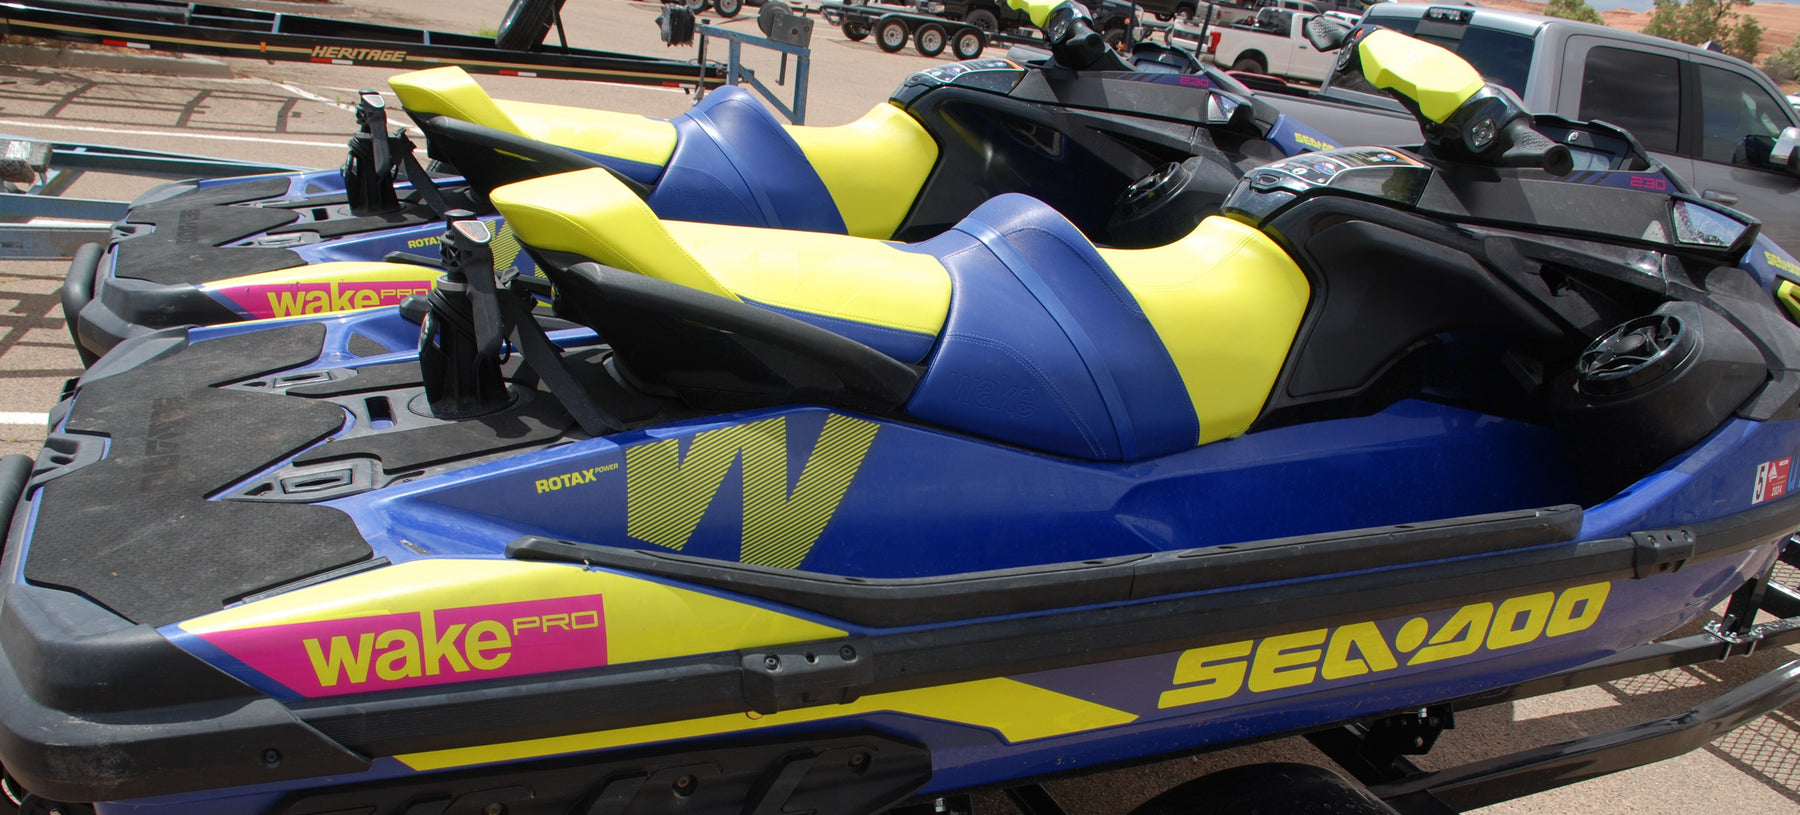 Personal watercraft, jet ski, waverunners for rent at Lake powell geared for pulling riders